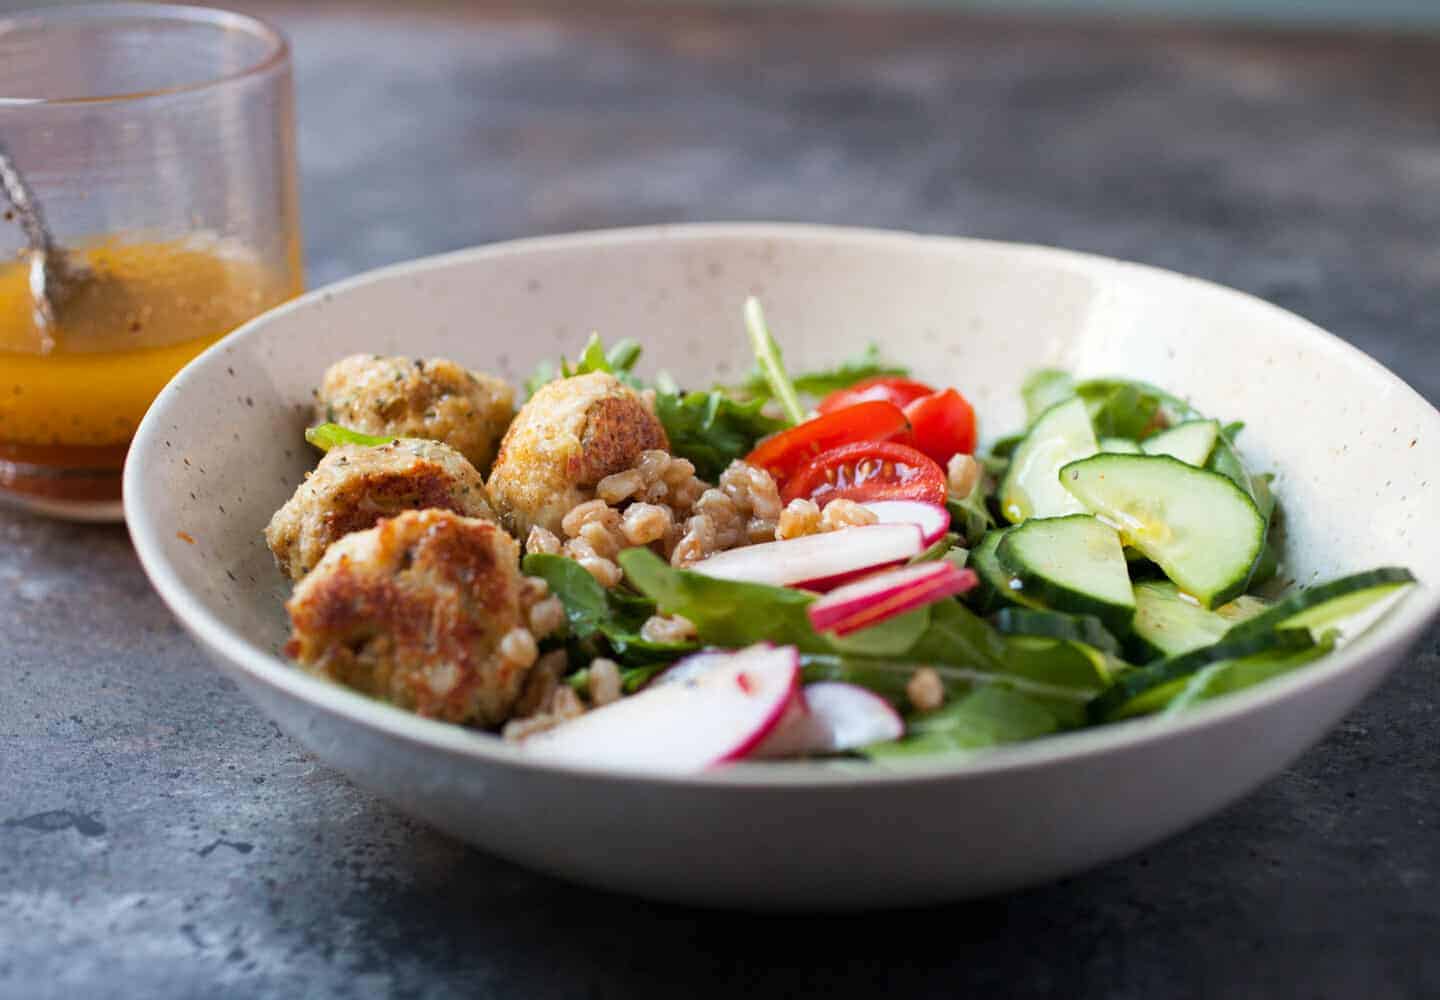 Apple Cider Farro Bowls with Chicken Meatballs Image